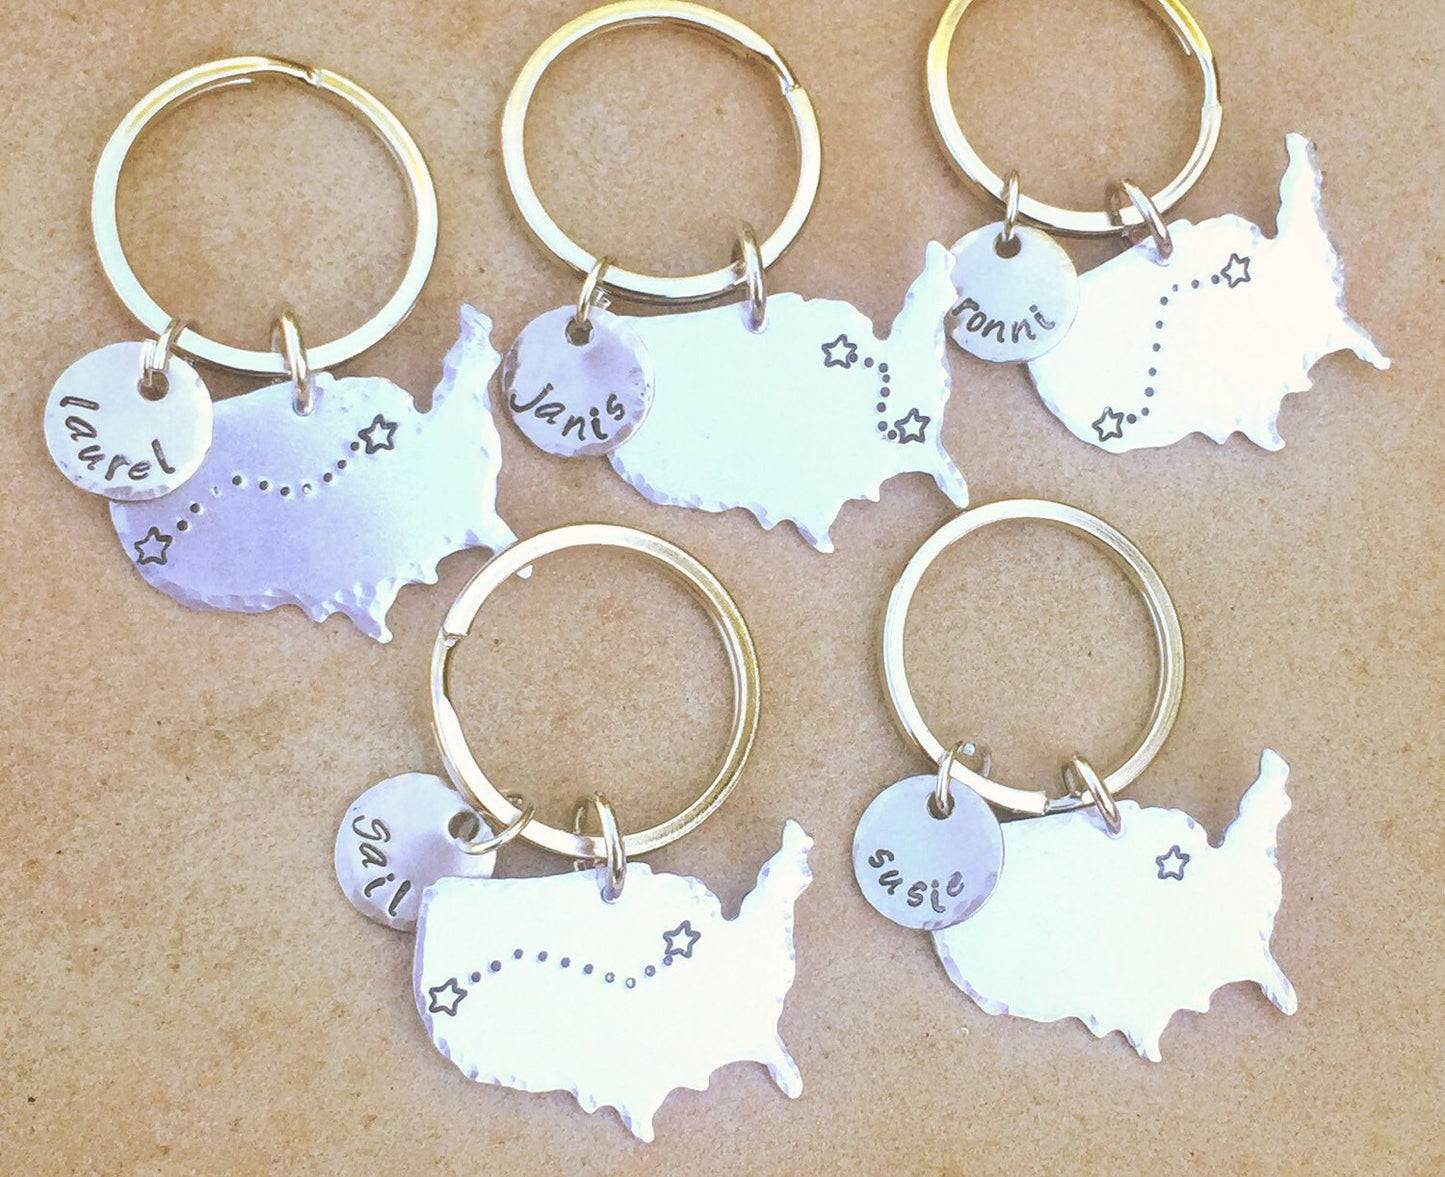 United States Keychain, Family Reunion, Graduation Gift, Long Distance Gifts, High School Reunion Gift, Reunion Gifts, Keychains - Natashaaloha, jewelry, bracelets, necklace, keychains, fishing lures, gifts for men, charms, personalized, 